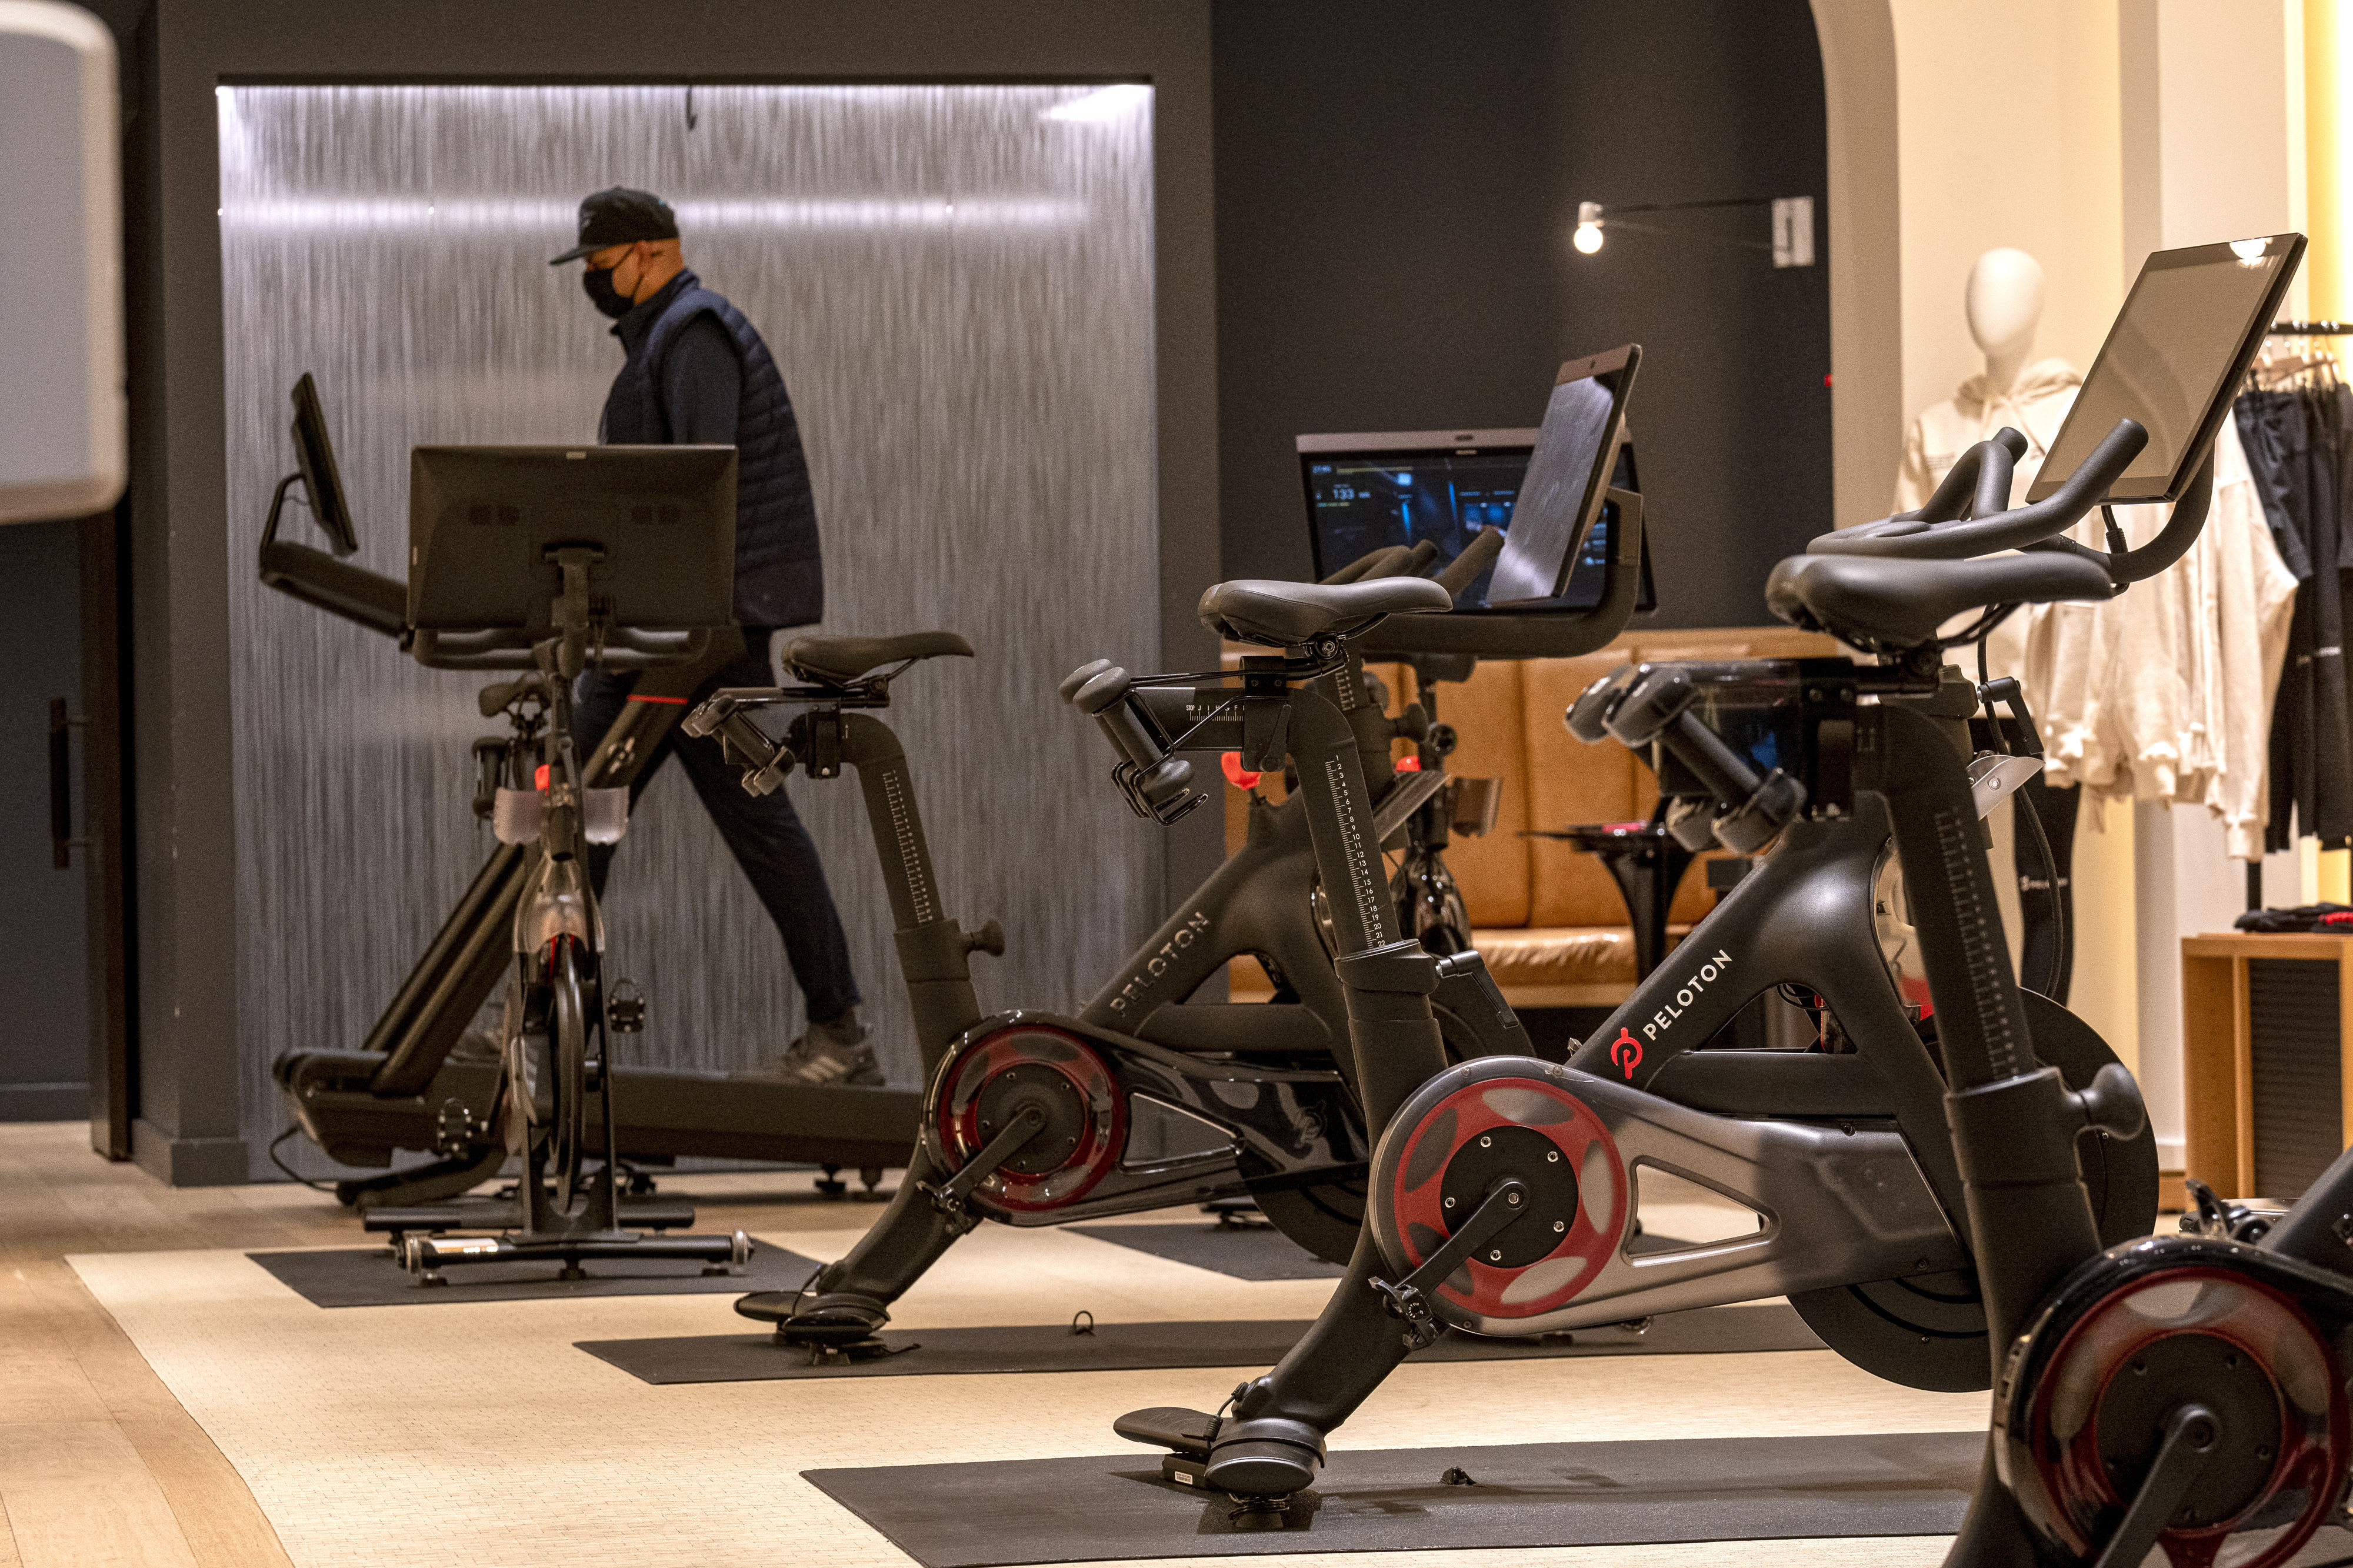 Peloton hit by major outage, company says it’s investigating the issue